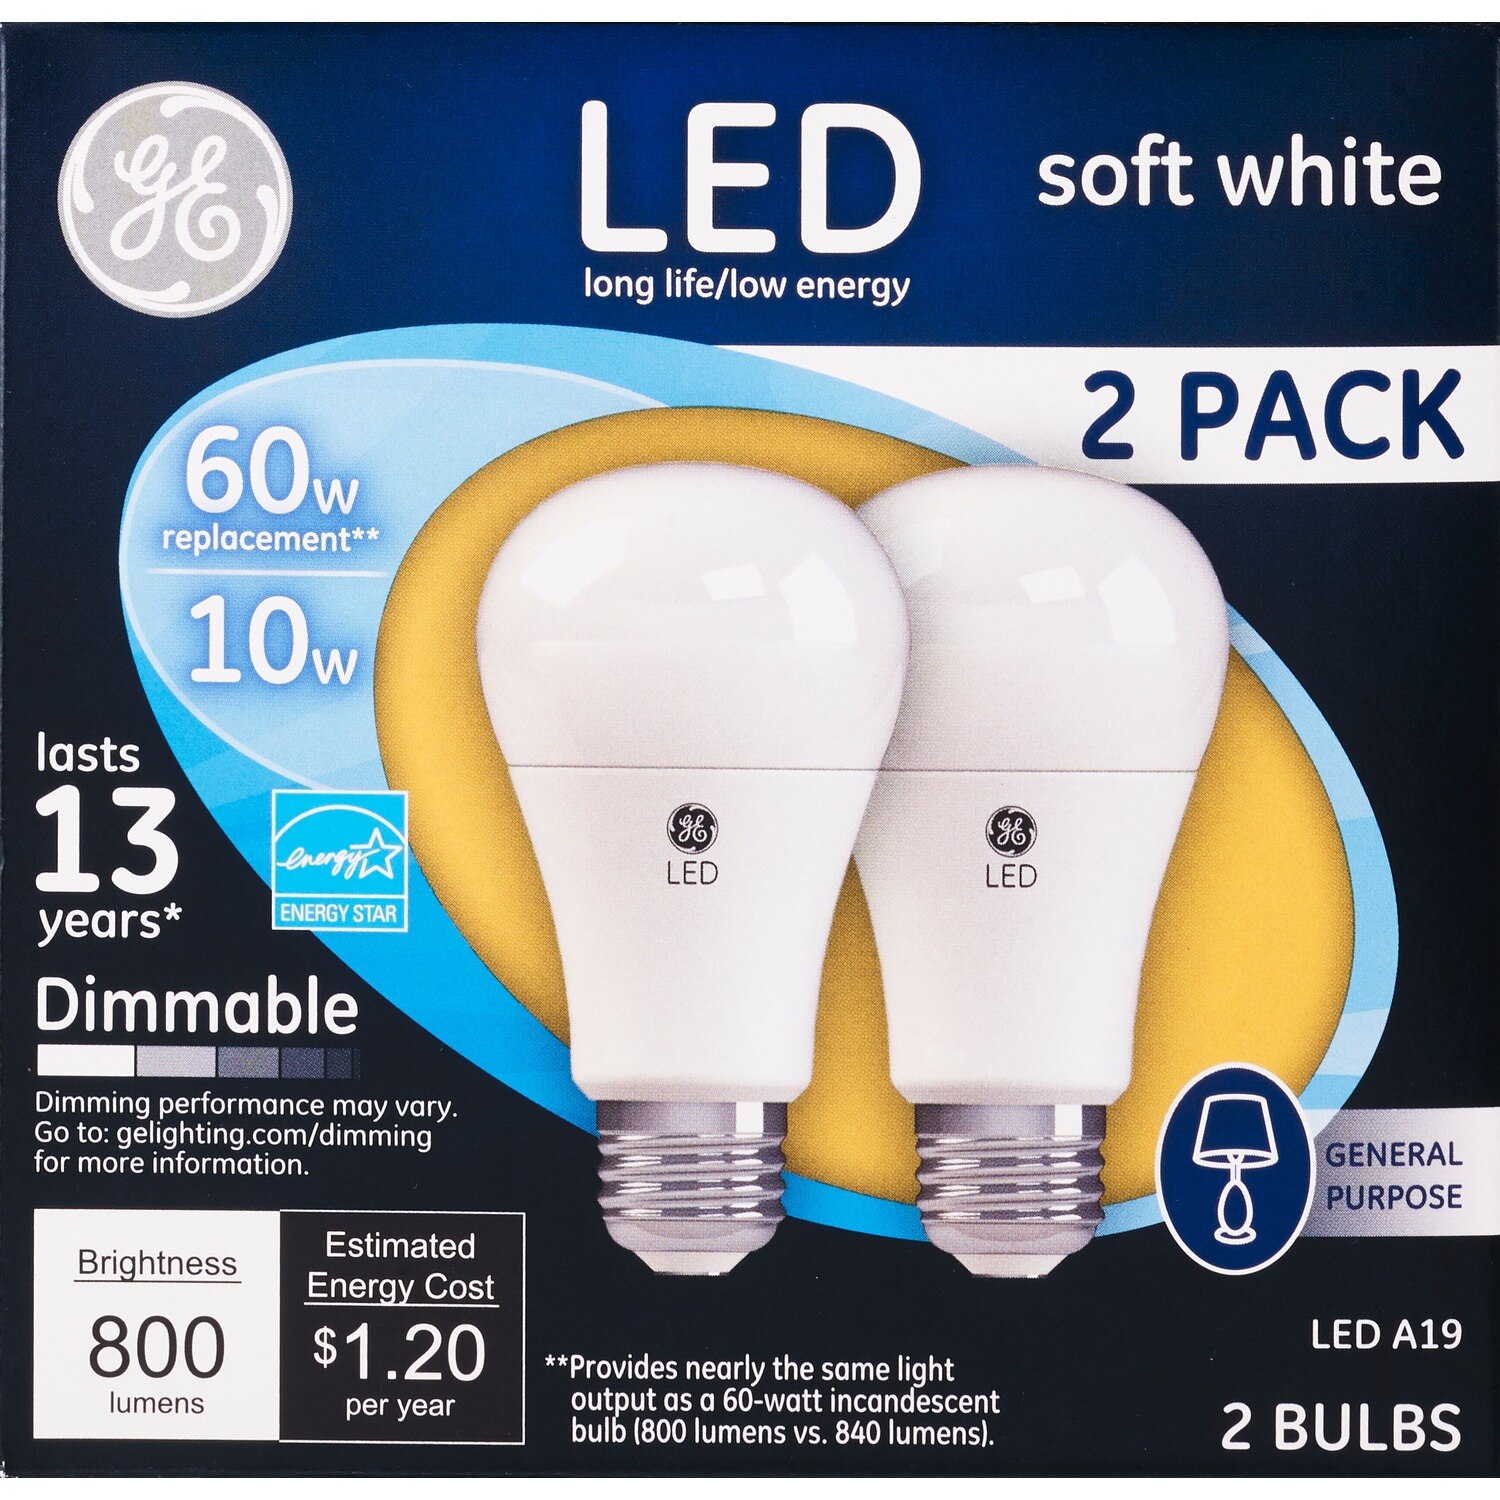 GE LED Soft White Dimmable A19 Light Bulbs, 10w, 2 CT